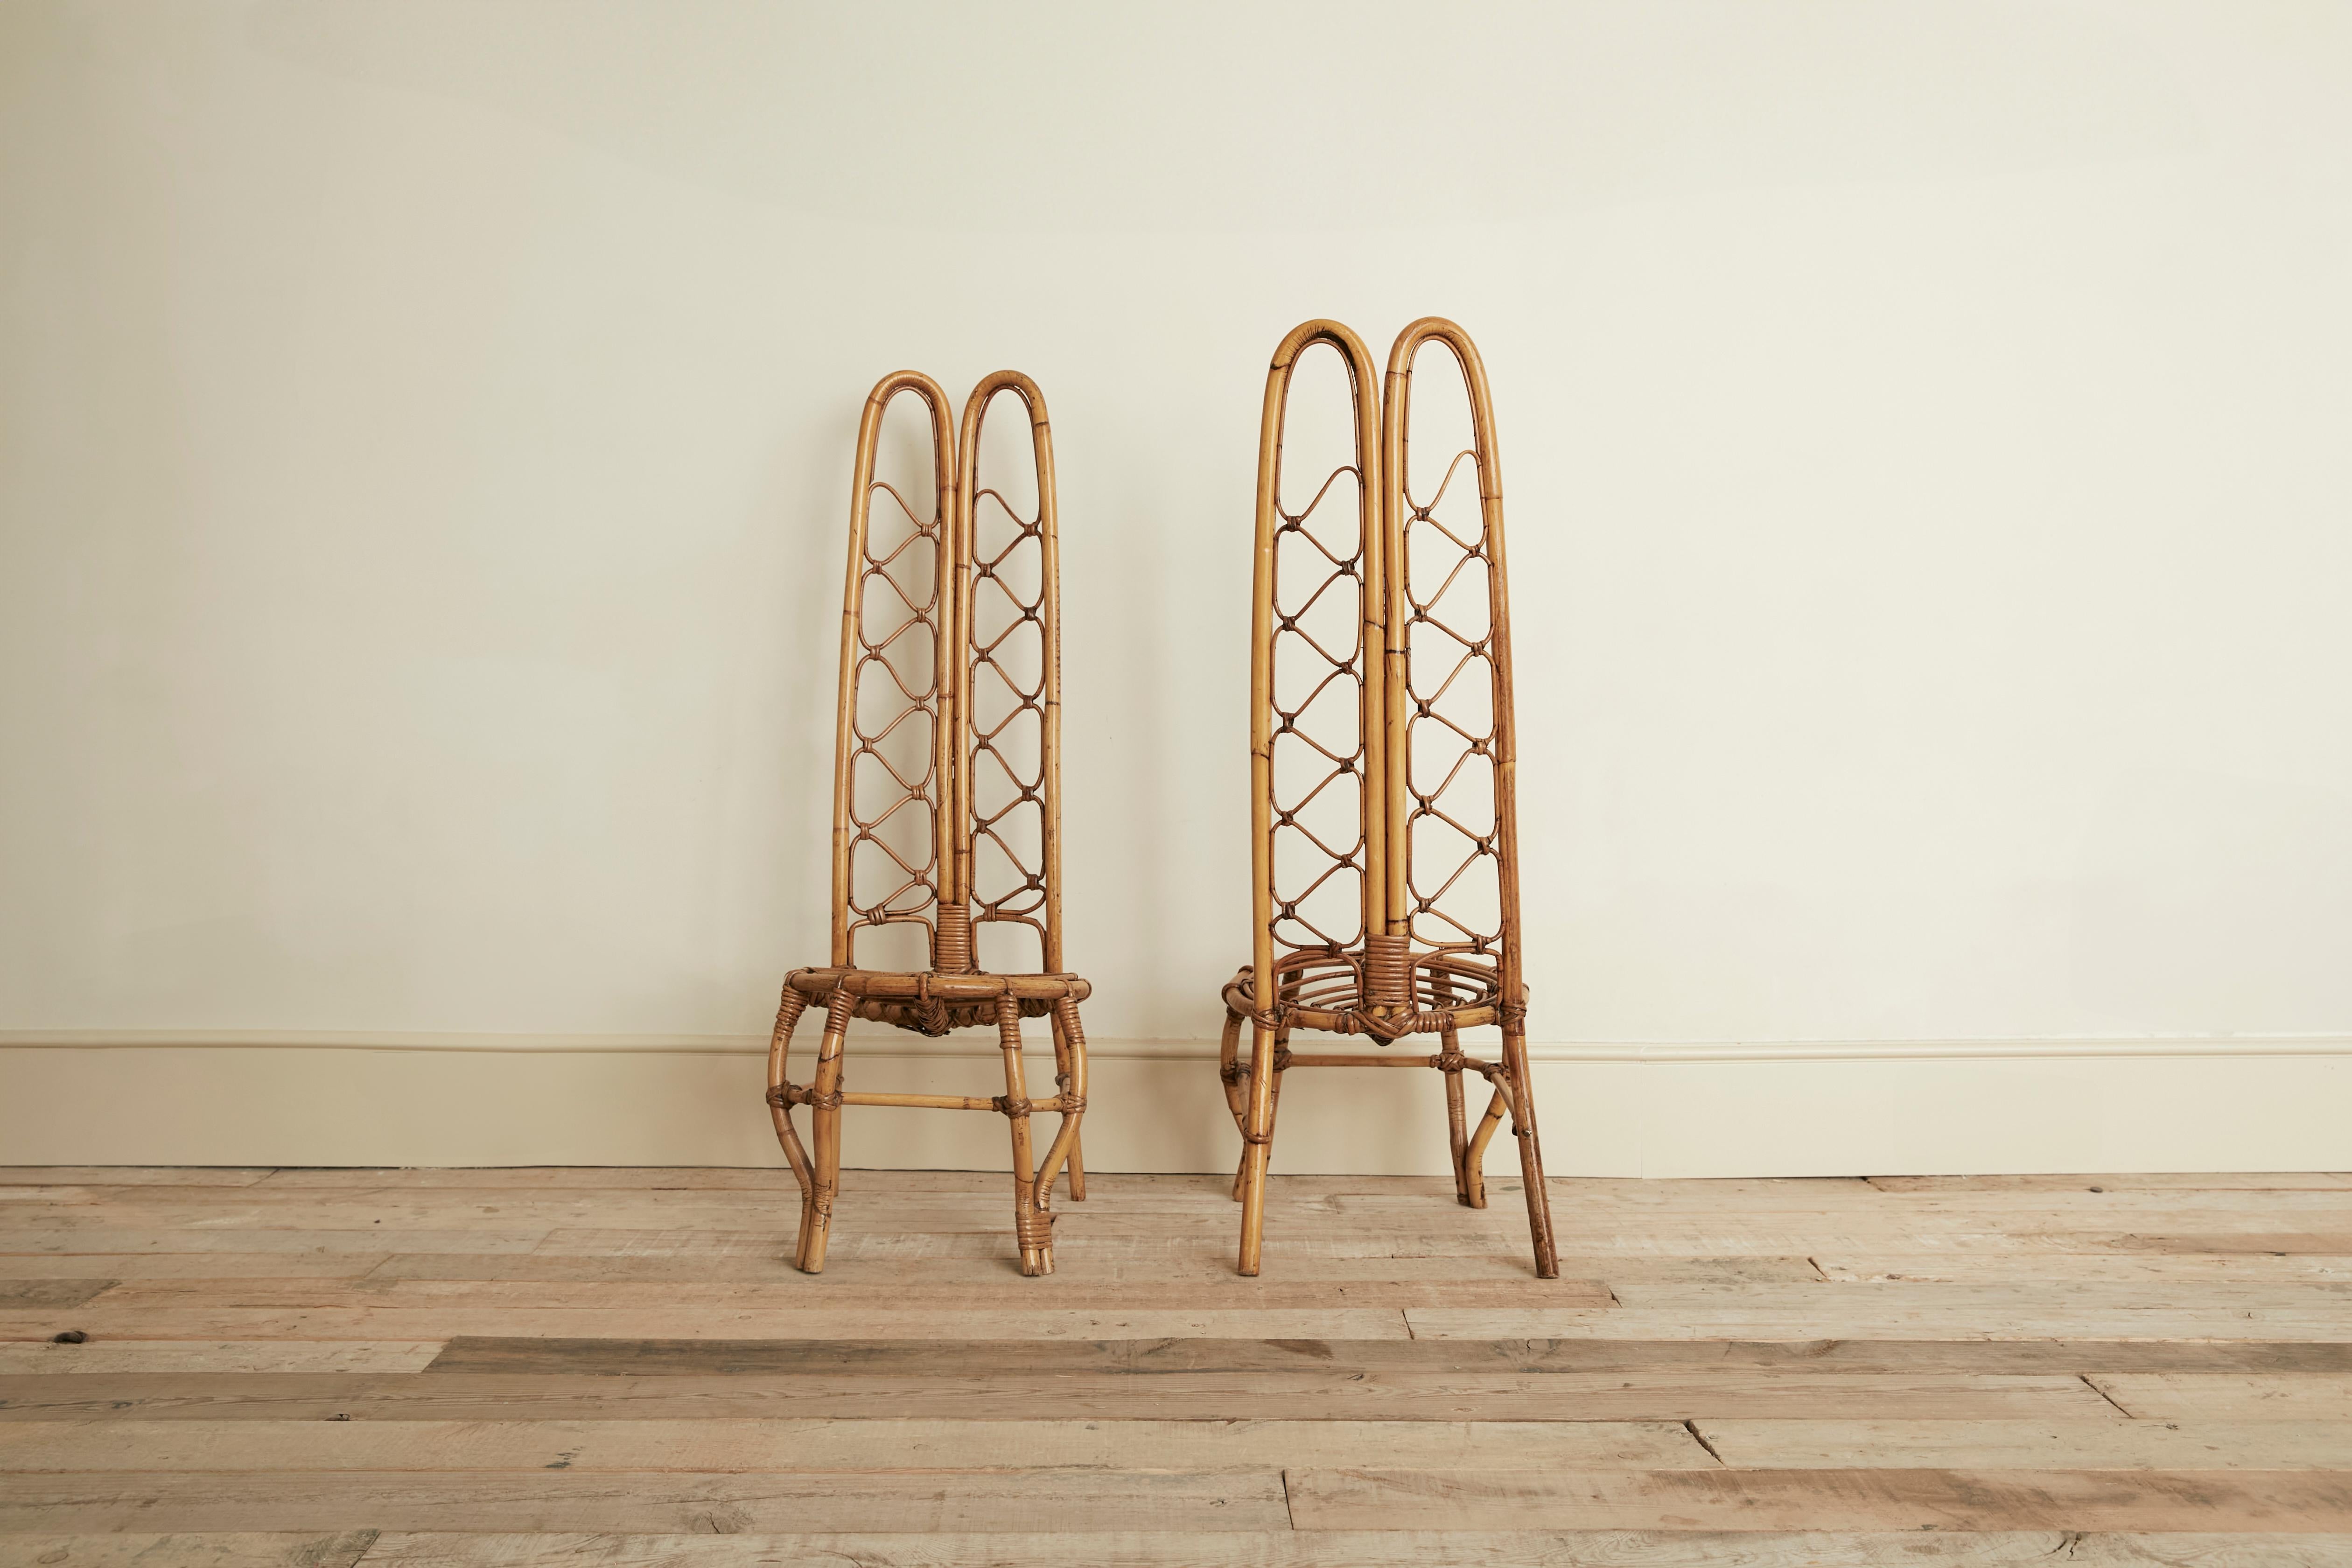 French Bamboo Riviera chairs from the 60's, Dirk Van Sliedrecht models For Sale